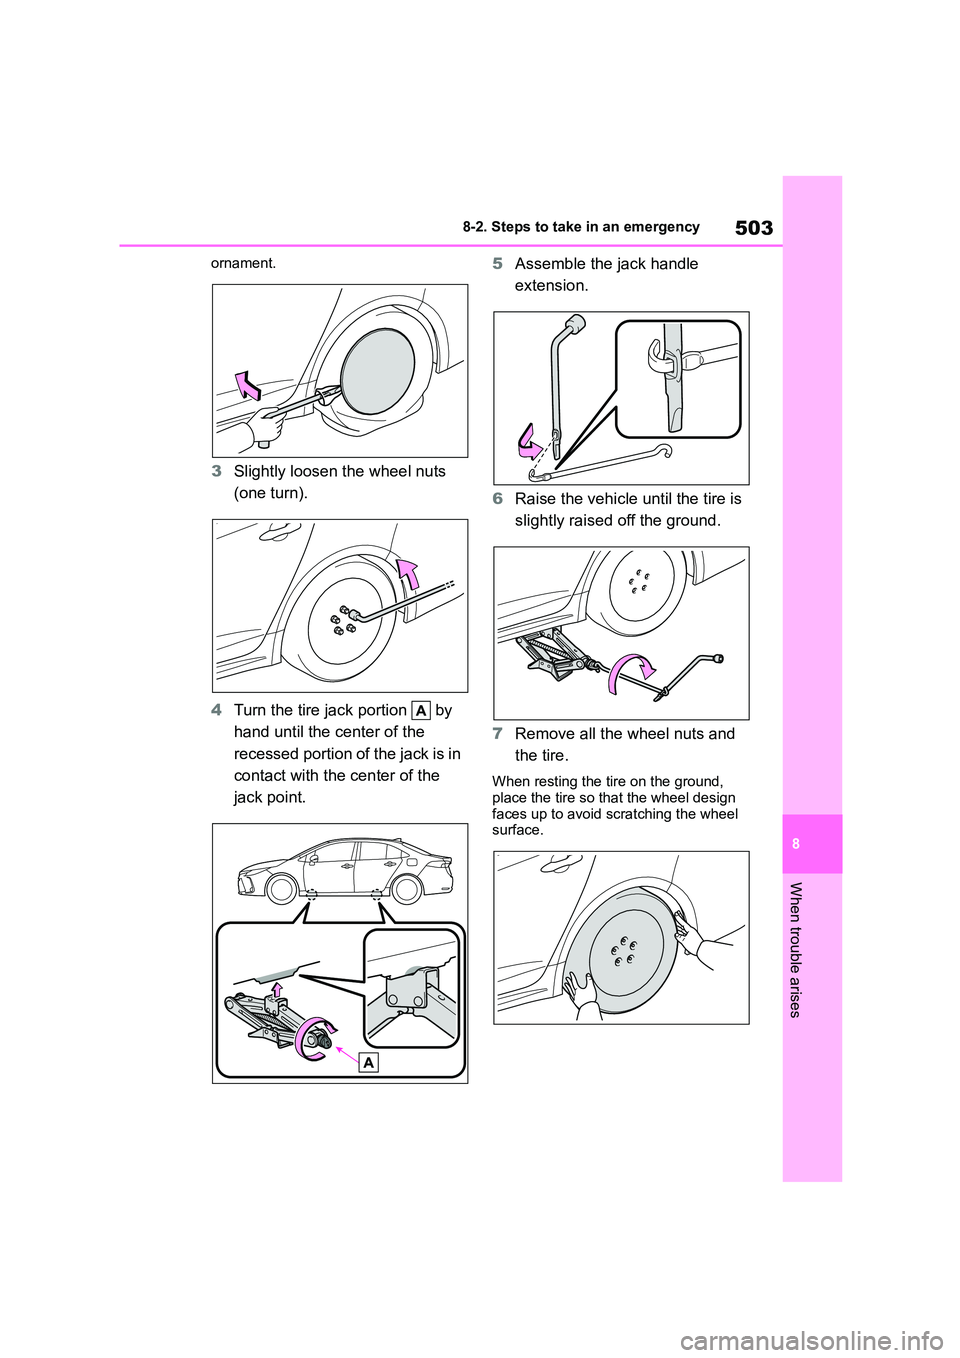 TOYOTA COROLLA 2022  Owners Manual (in English) 503
8 
8-2. Steps to take in an emergency
When trouble arises
ornament.
3 Slightly loosen the wheel nuts  
(one turn). 
4 Turn the tire jack portion   by  
hand until the center of the 
recessed porti